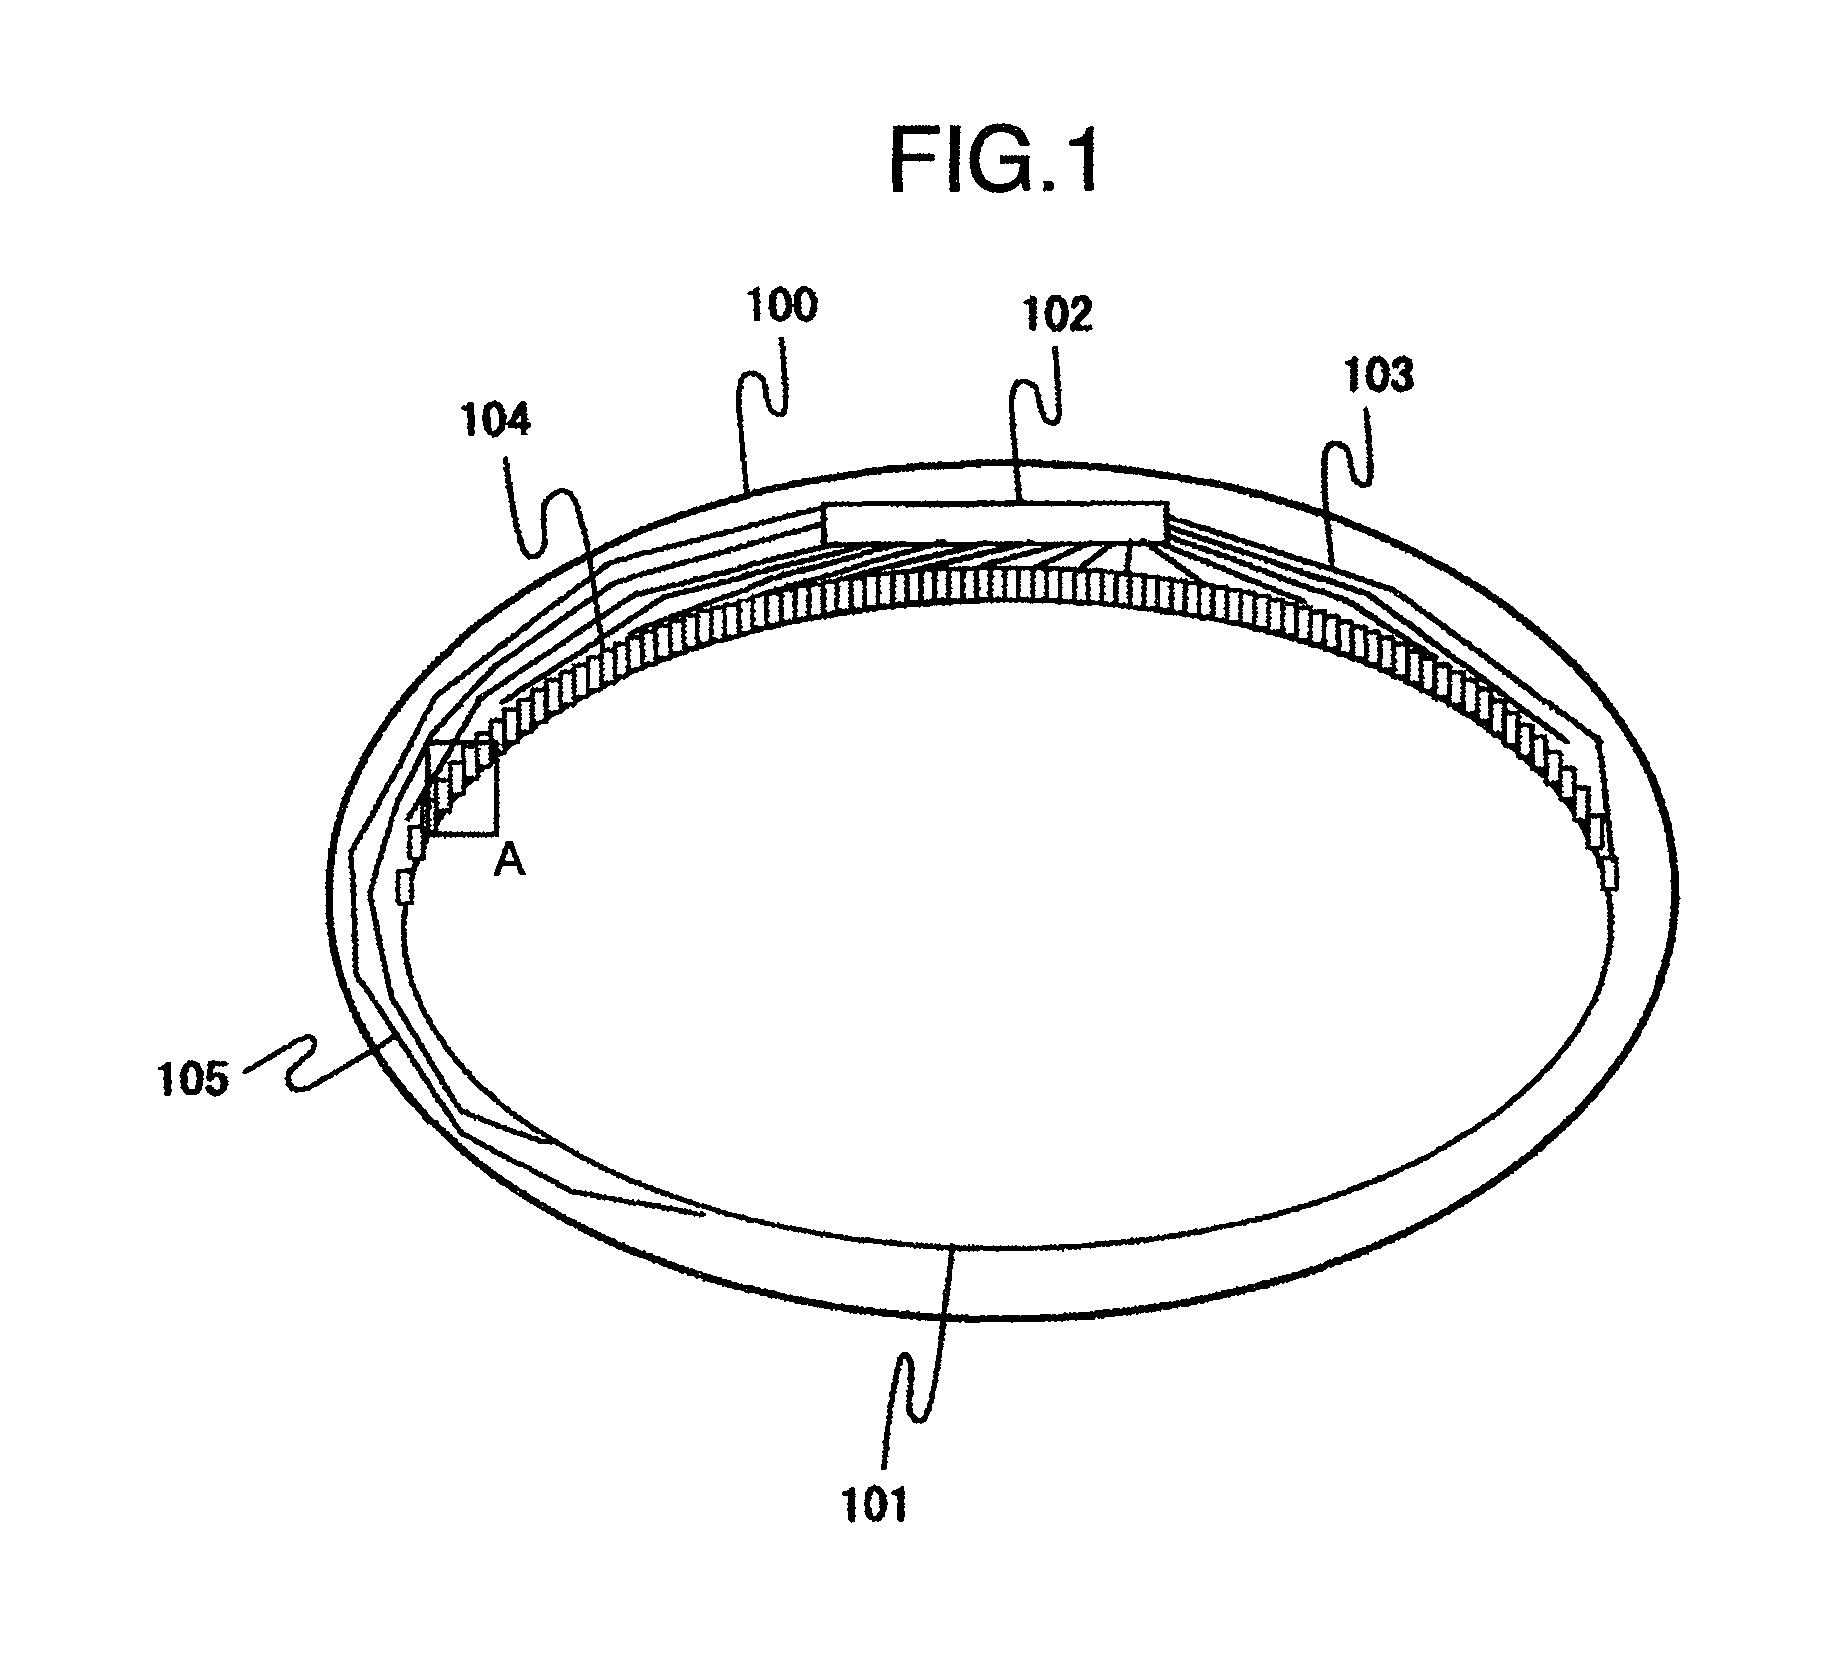 Display device having particular pixels and signal wiring internal circuits